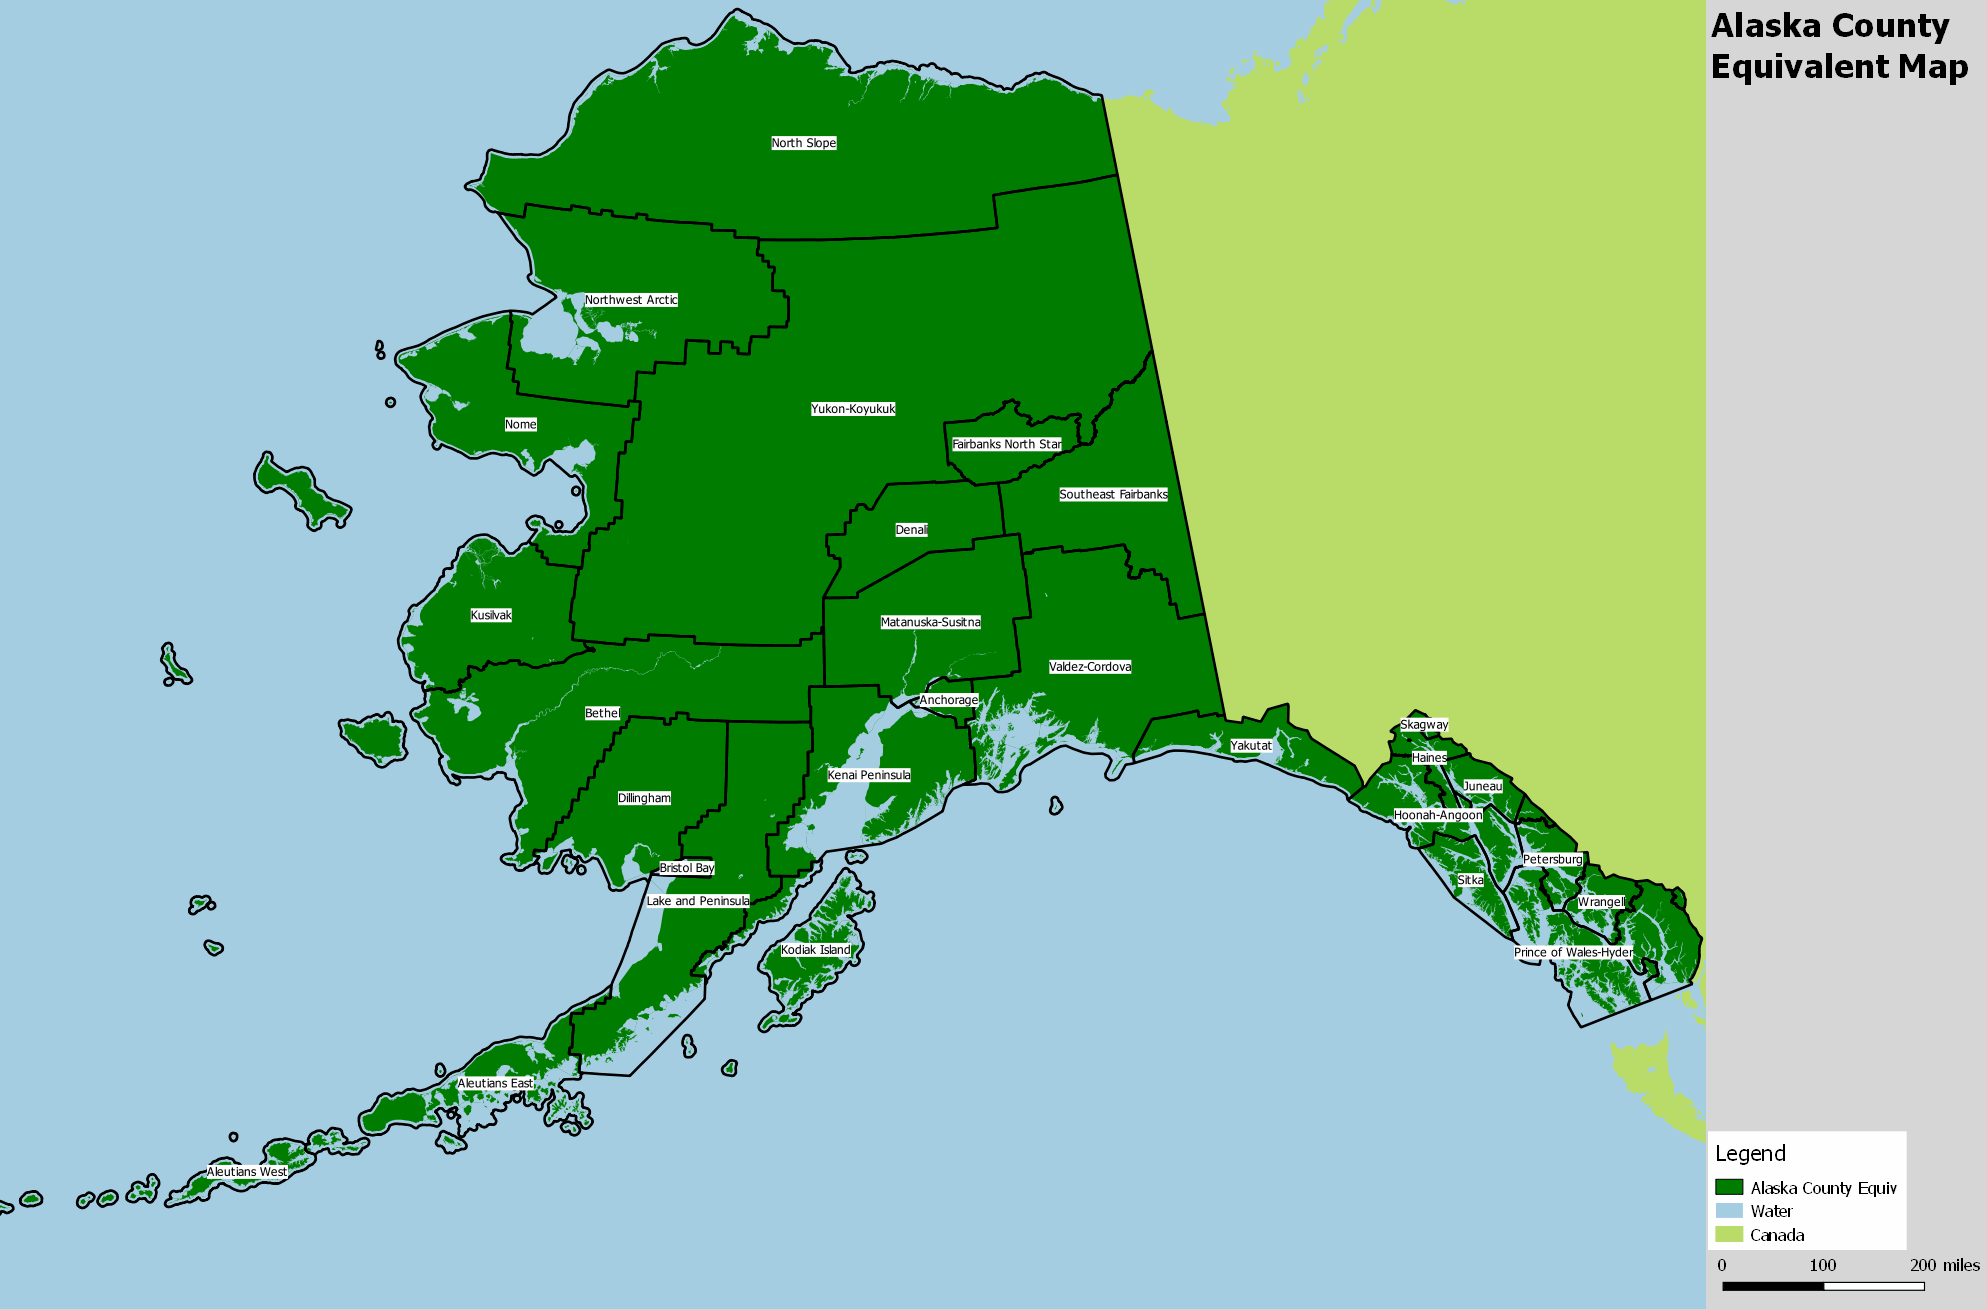 Overview GIF of Alaska Presidential Election Results by County, 1960-2016